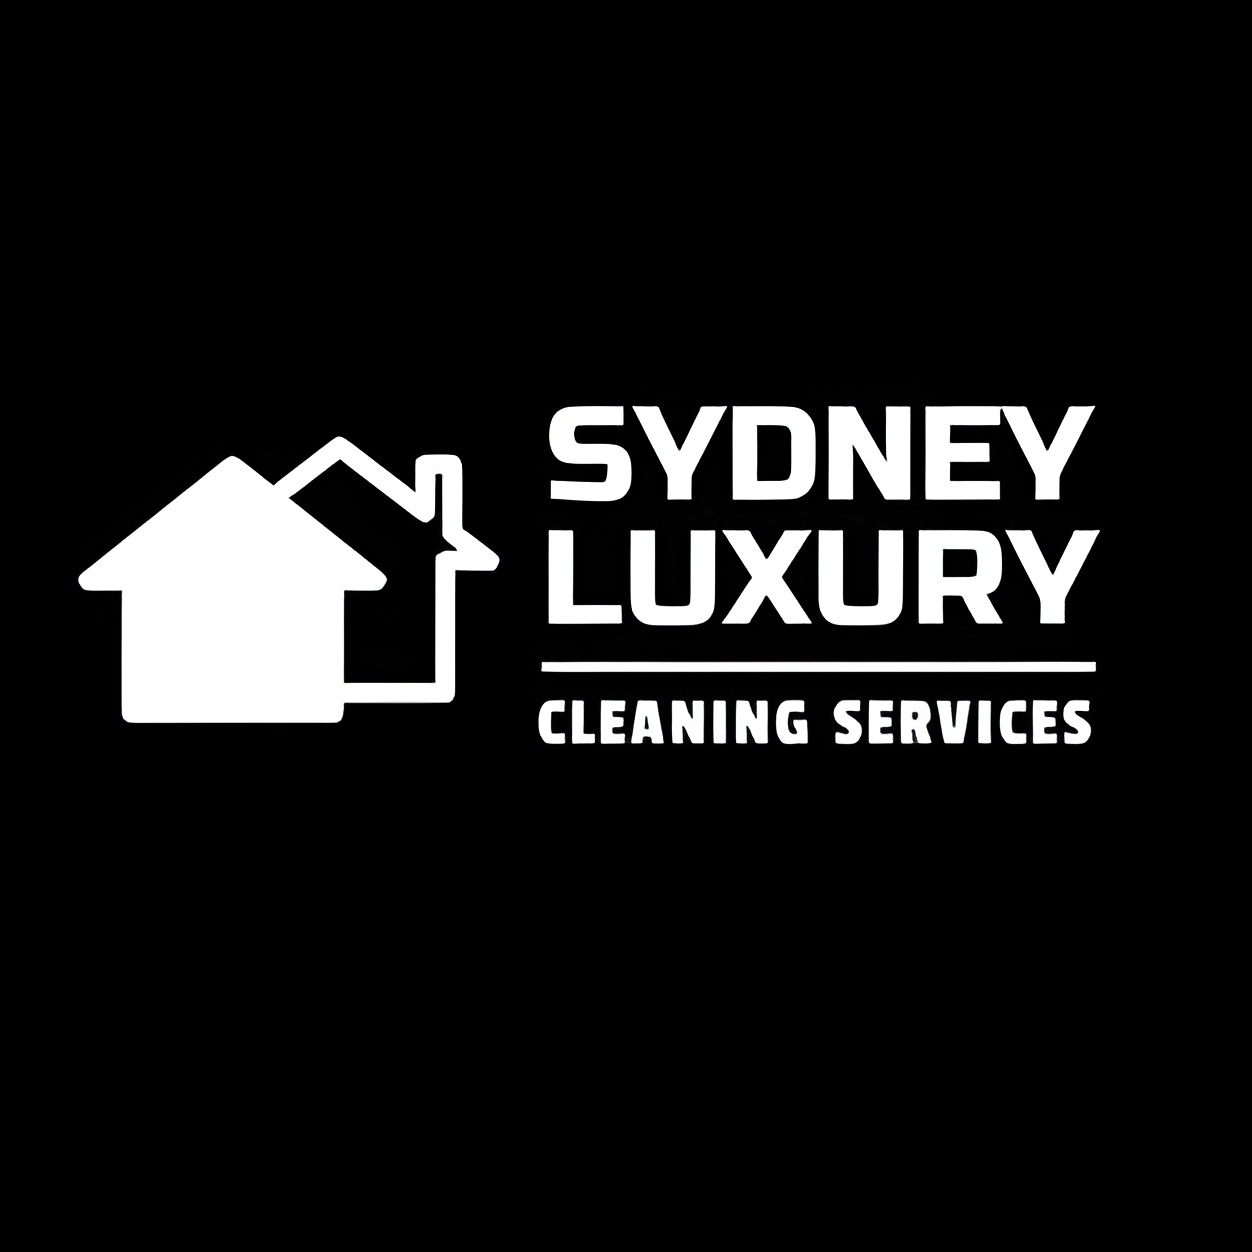 Sydney Luxury Cleaning Services Sydney